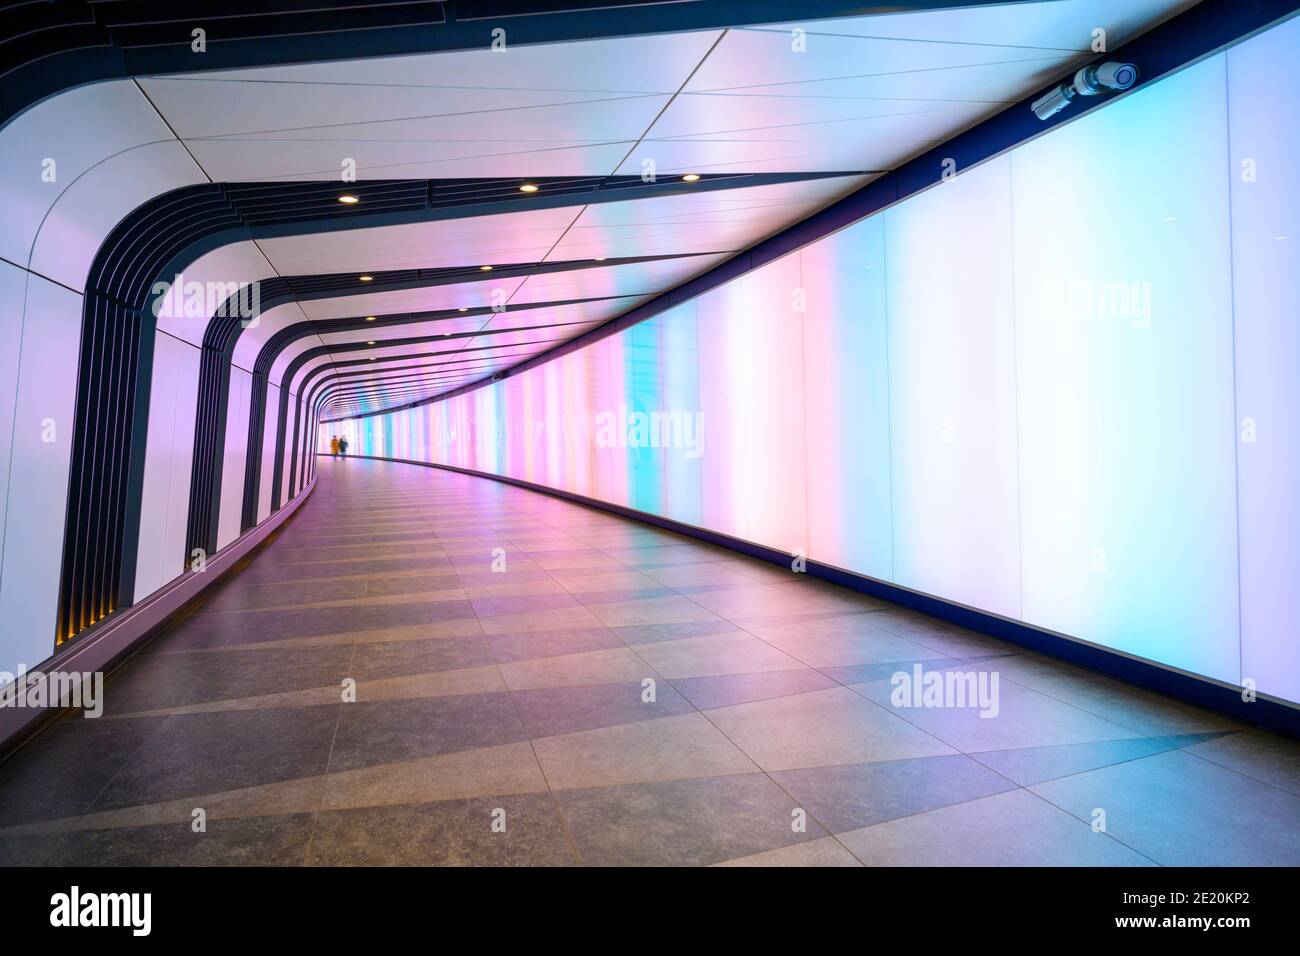 Abstract diminishing perspective view of underground light tunnel Stock Photo